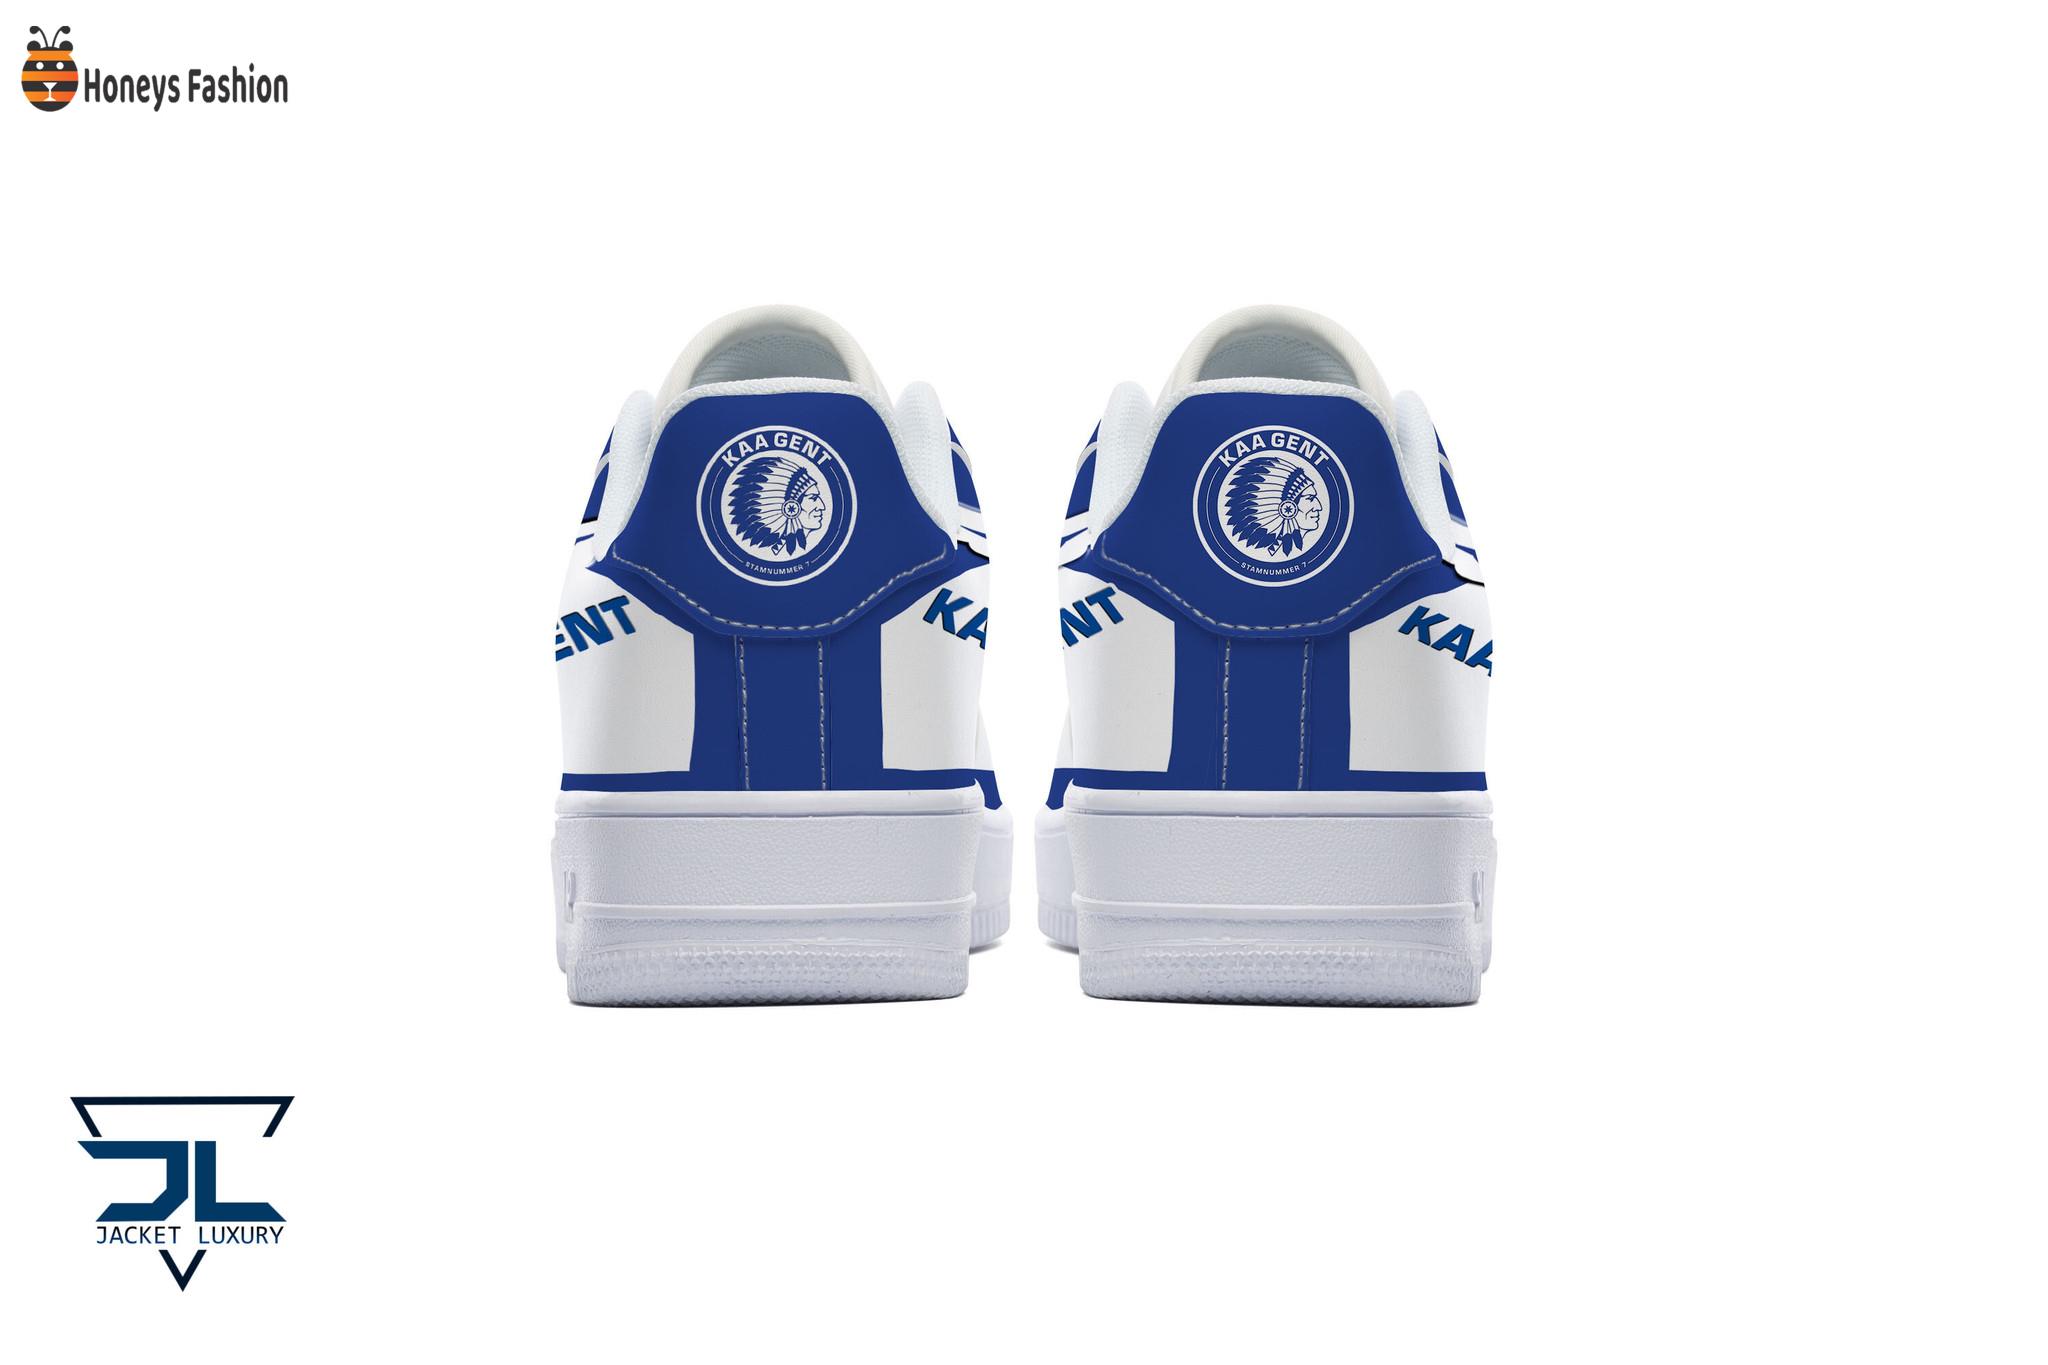 KAA Gent Air Force 1 Shoes Sneaker